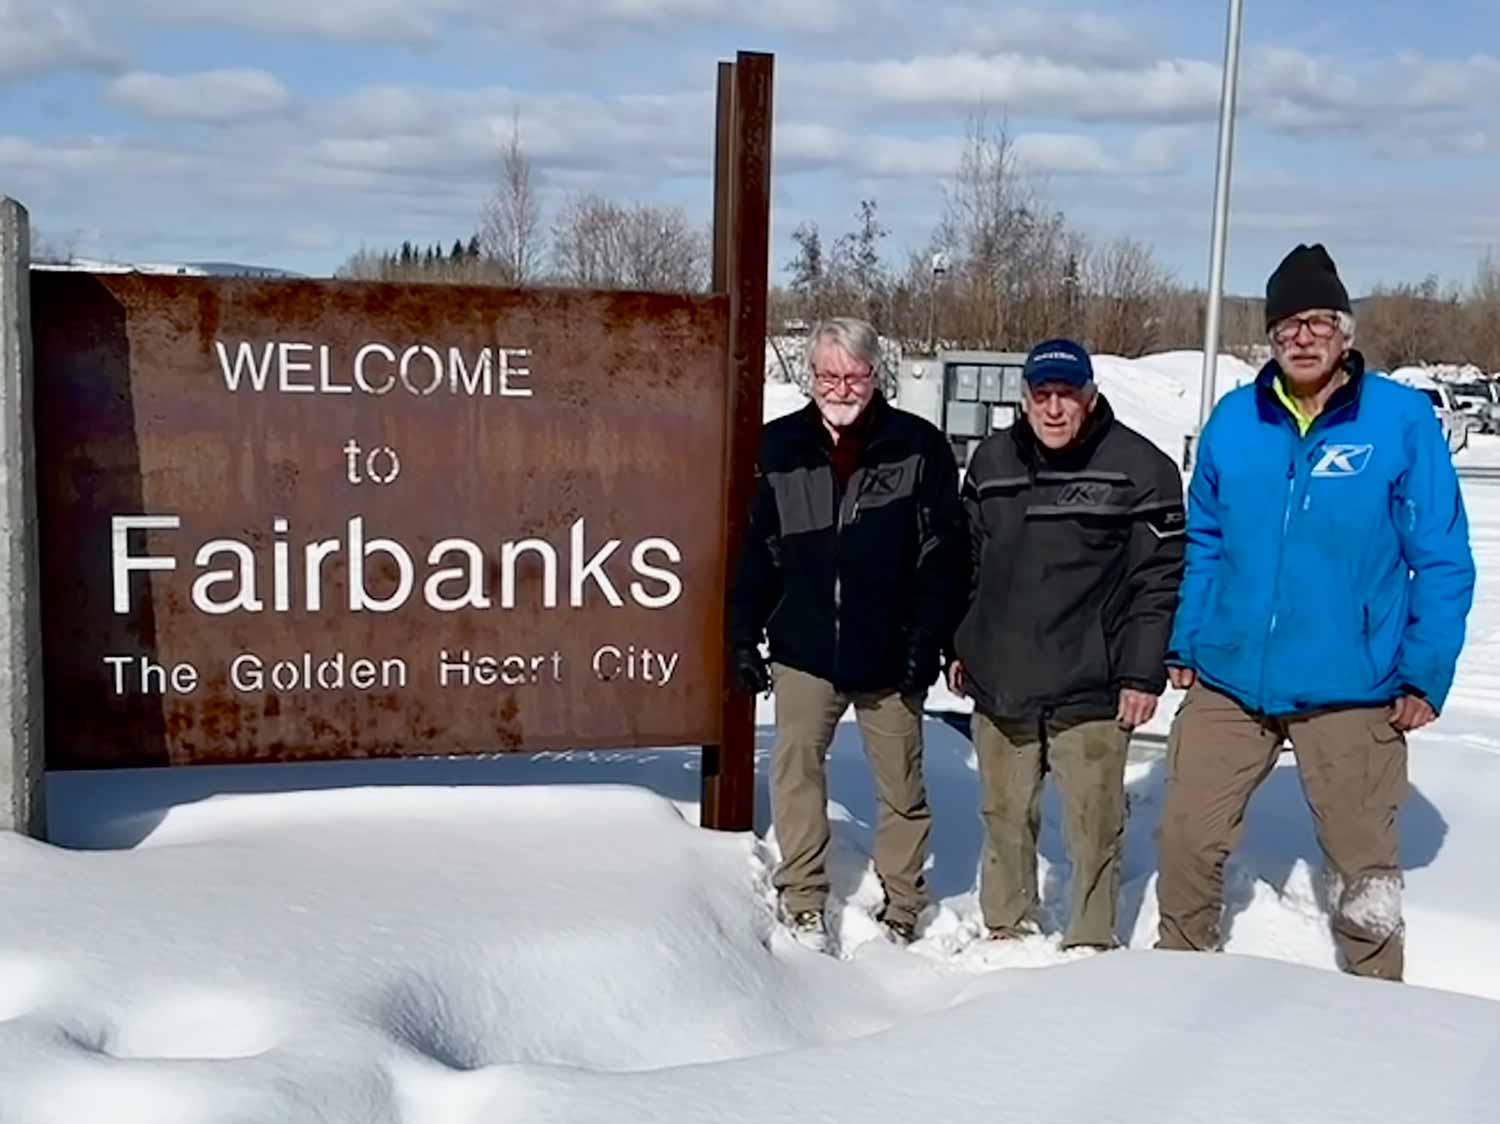 Three men pose next to a sign that says Welcome to Fairbanks, the Golden Heart City.